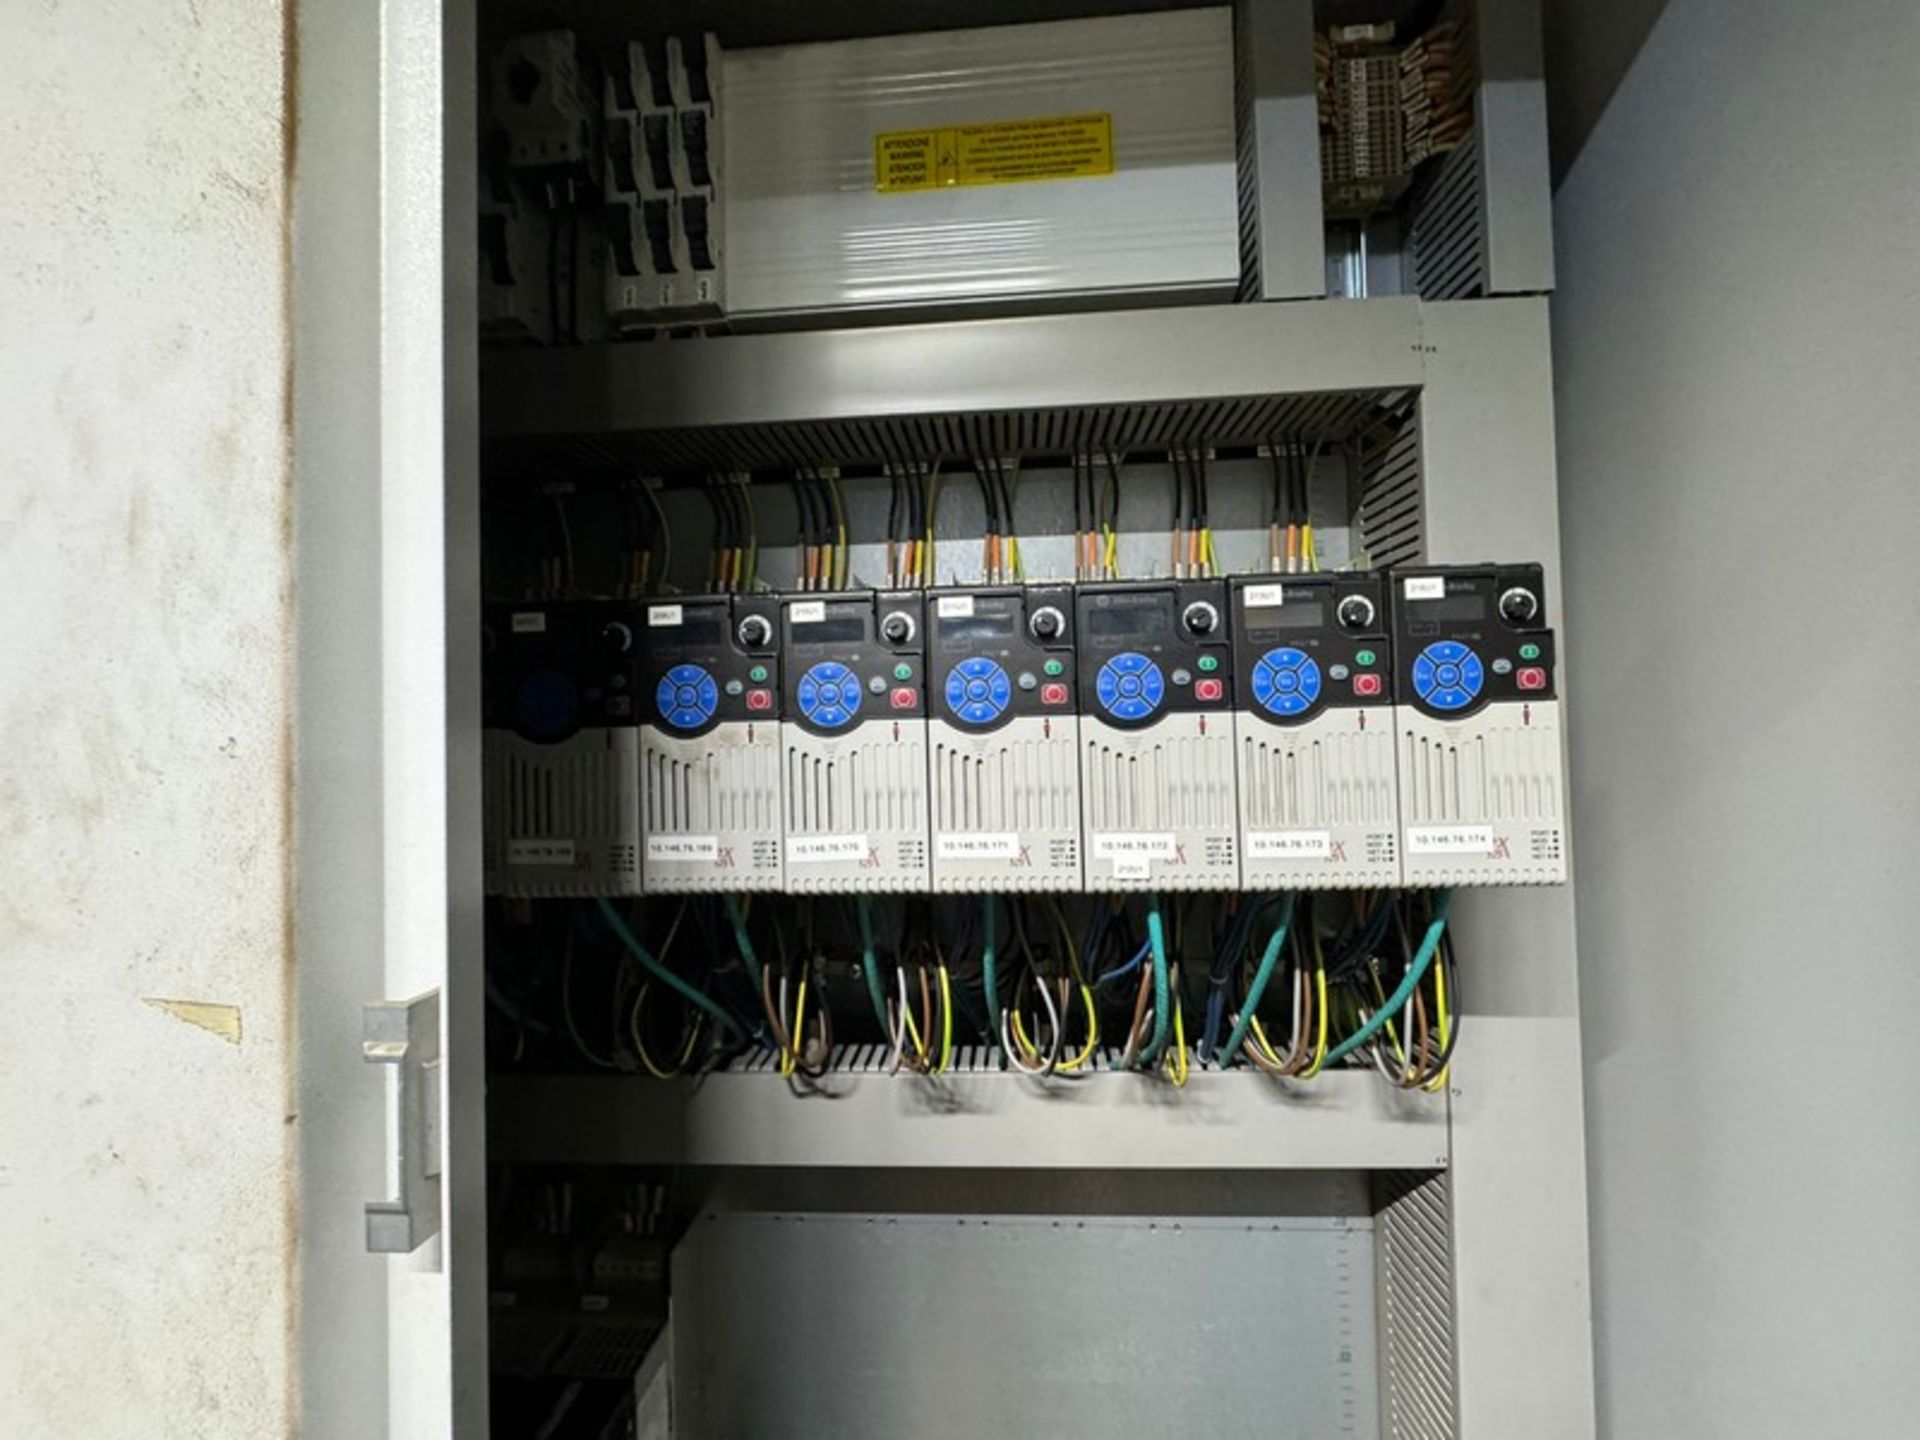 SIPAC 4-Door Control Panel, Allen-Bradley VFDs & Other Components (LOCATED IN FREEHOLD, N.J.) - Image 3 of 7